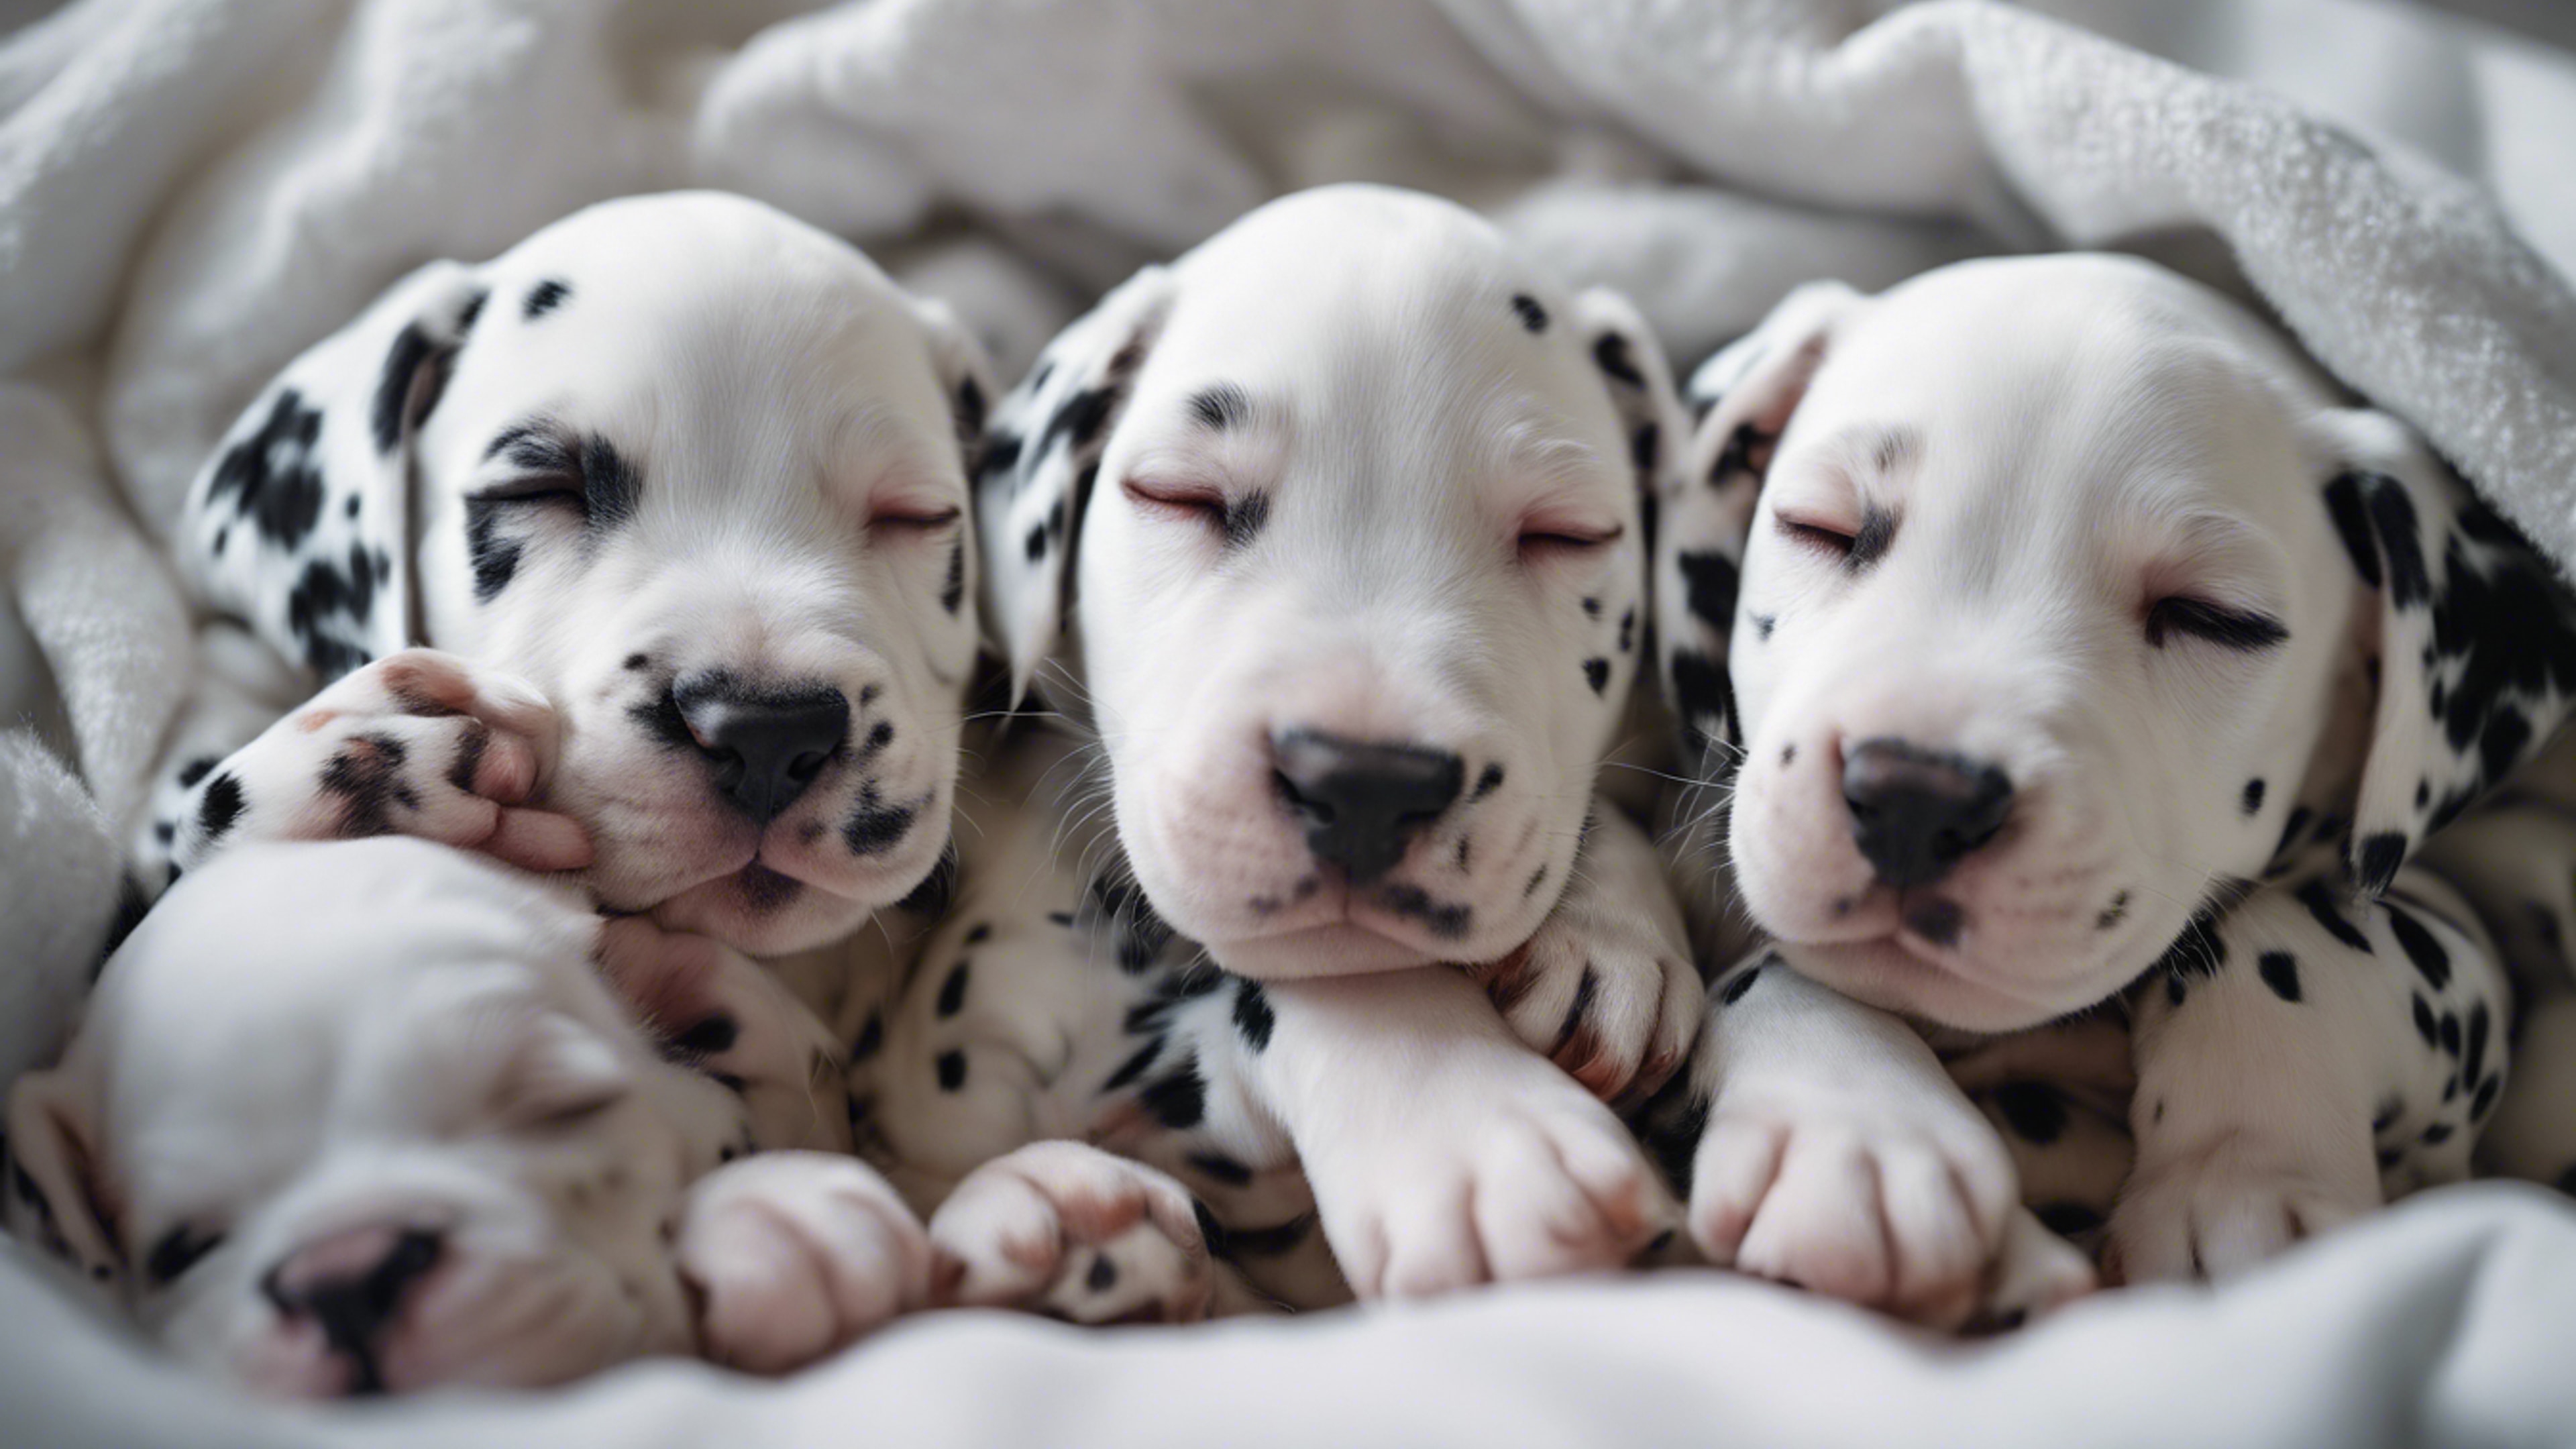 A cluster of sleeping Dalmatian puppies under a cozy white blanket in a nursery room. Валлпапер[4a5dc312c1f344509ca9]